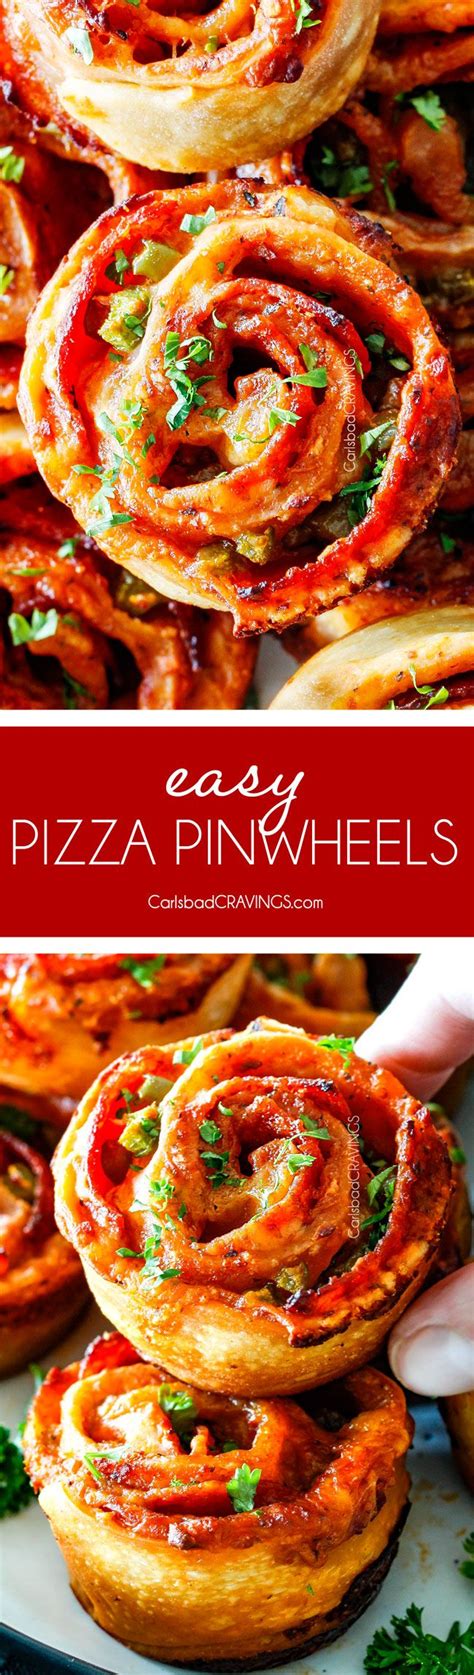 these pizza pinwheels are super easy to make customizable